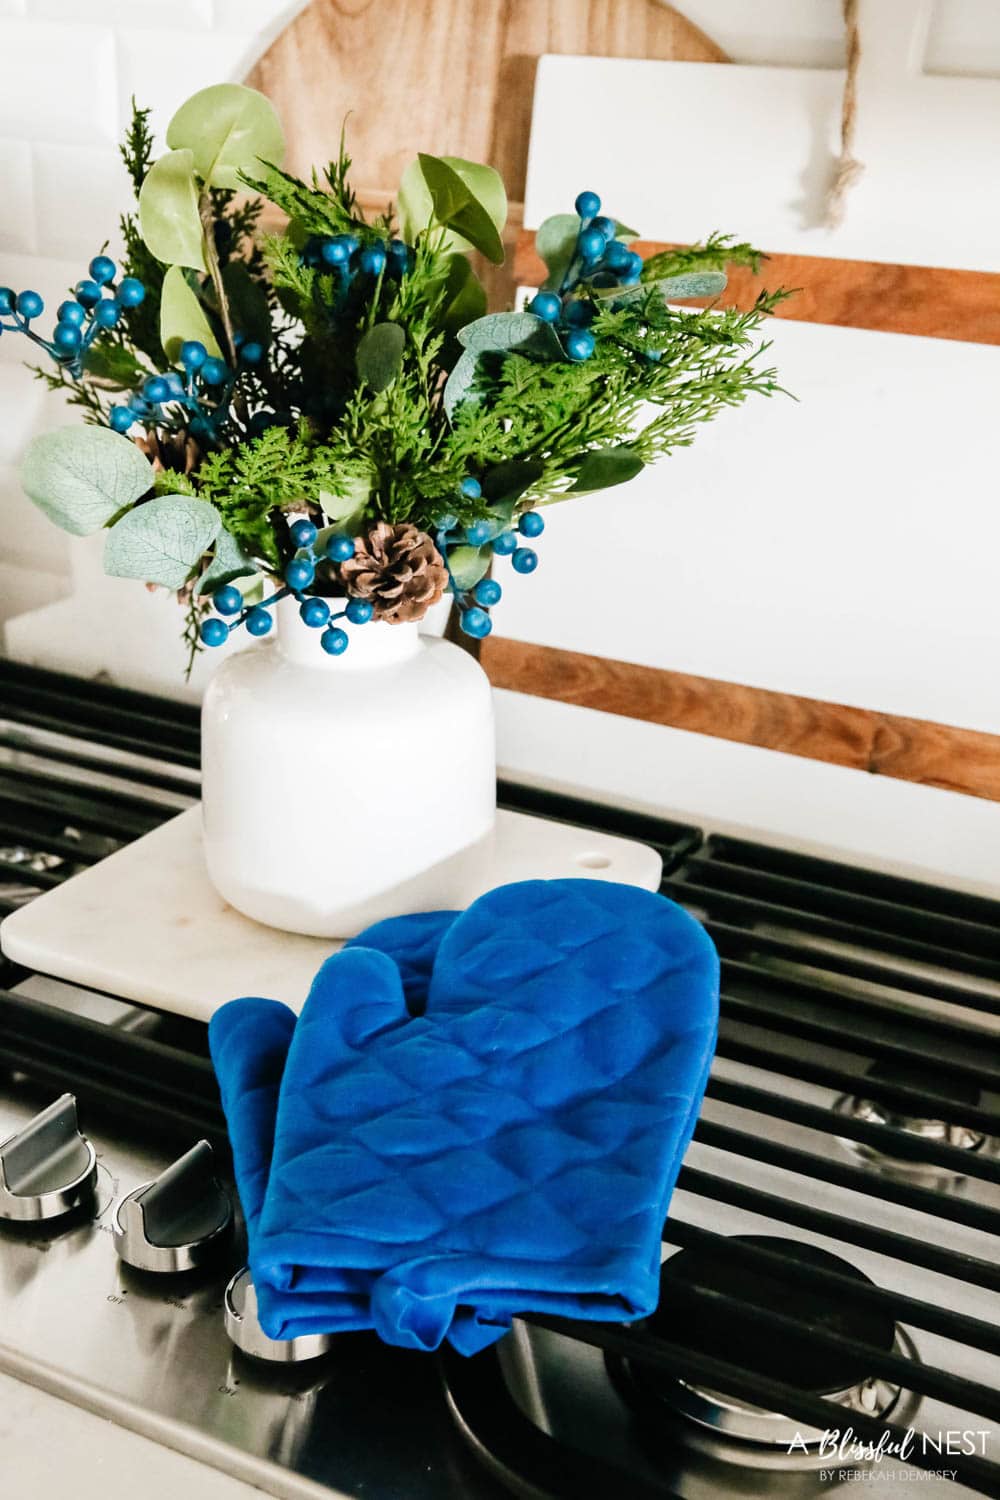 A white vase with greenery and berries, navy potholders sitting on a stove with cutting boards behind it.